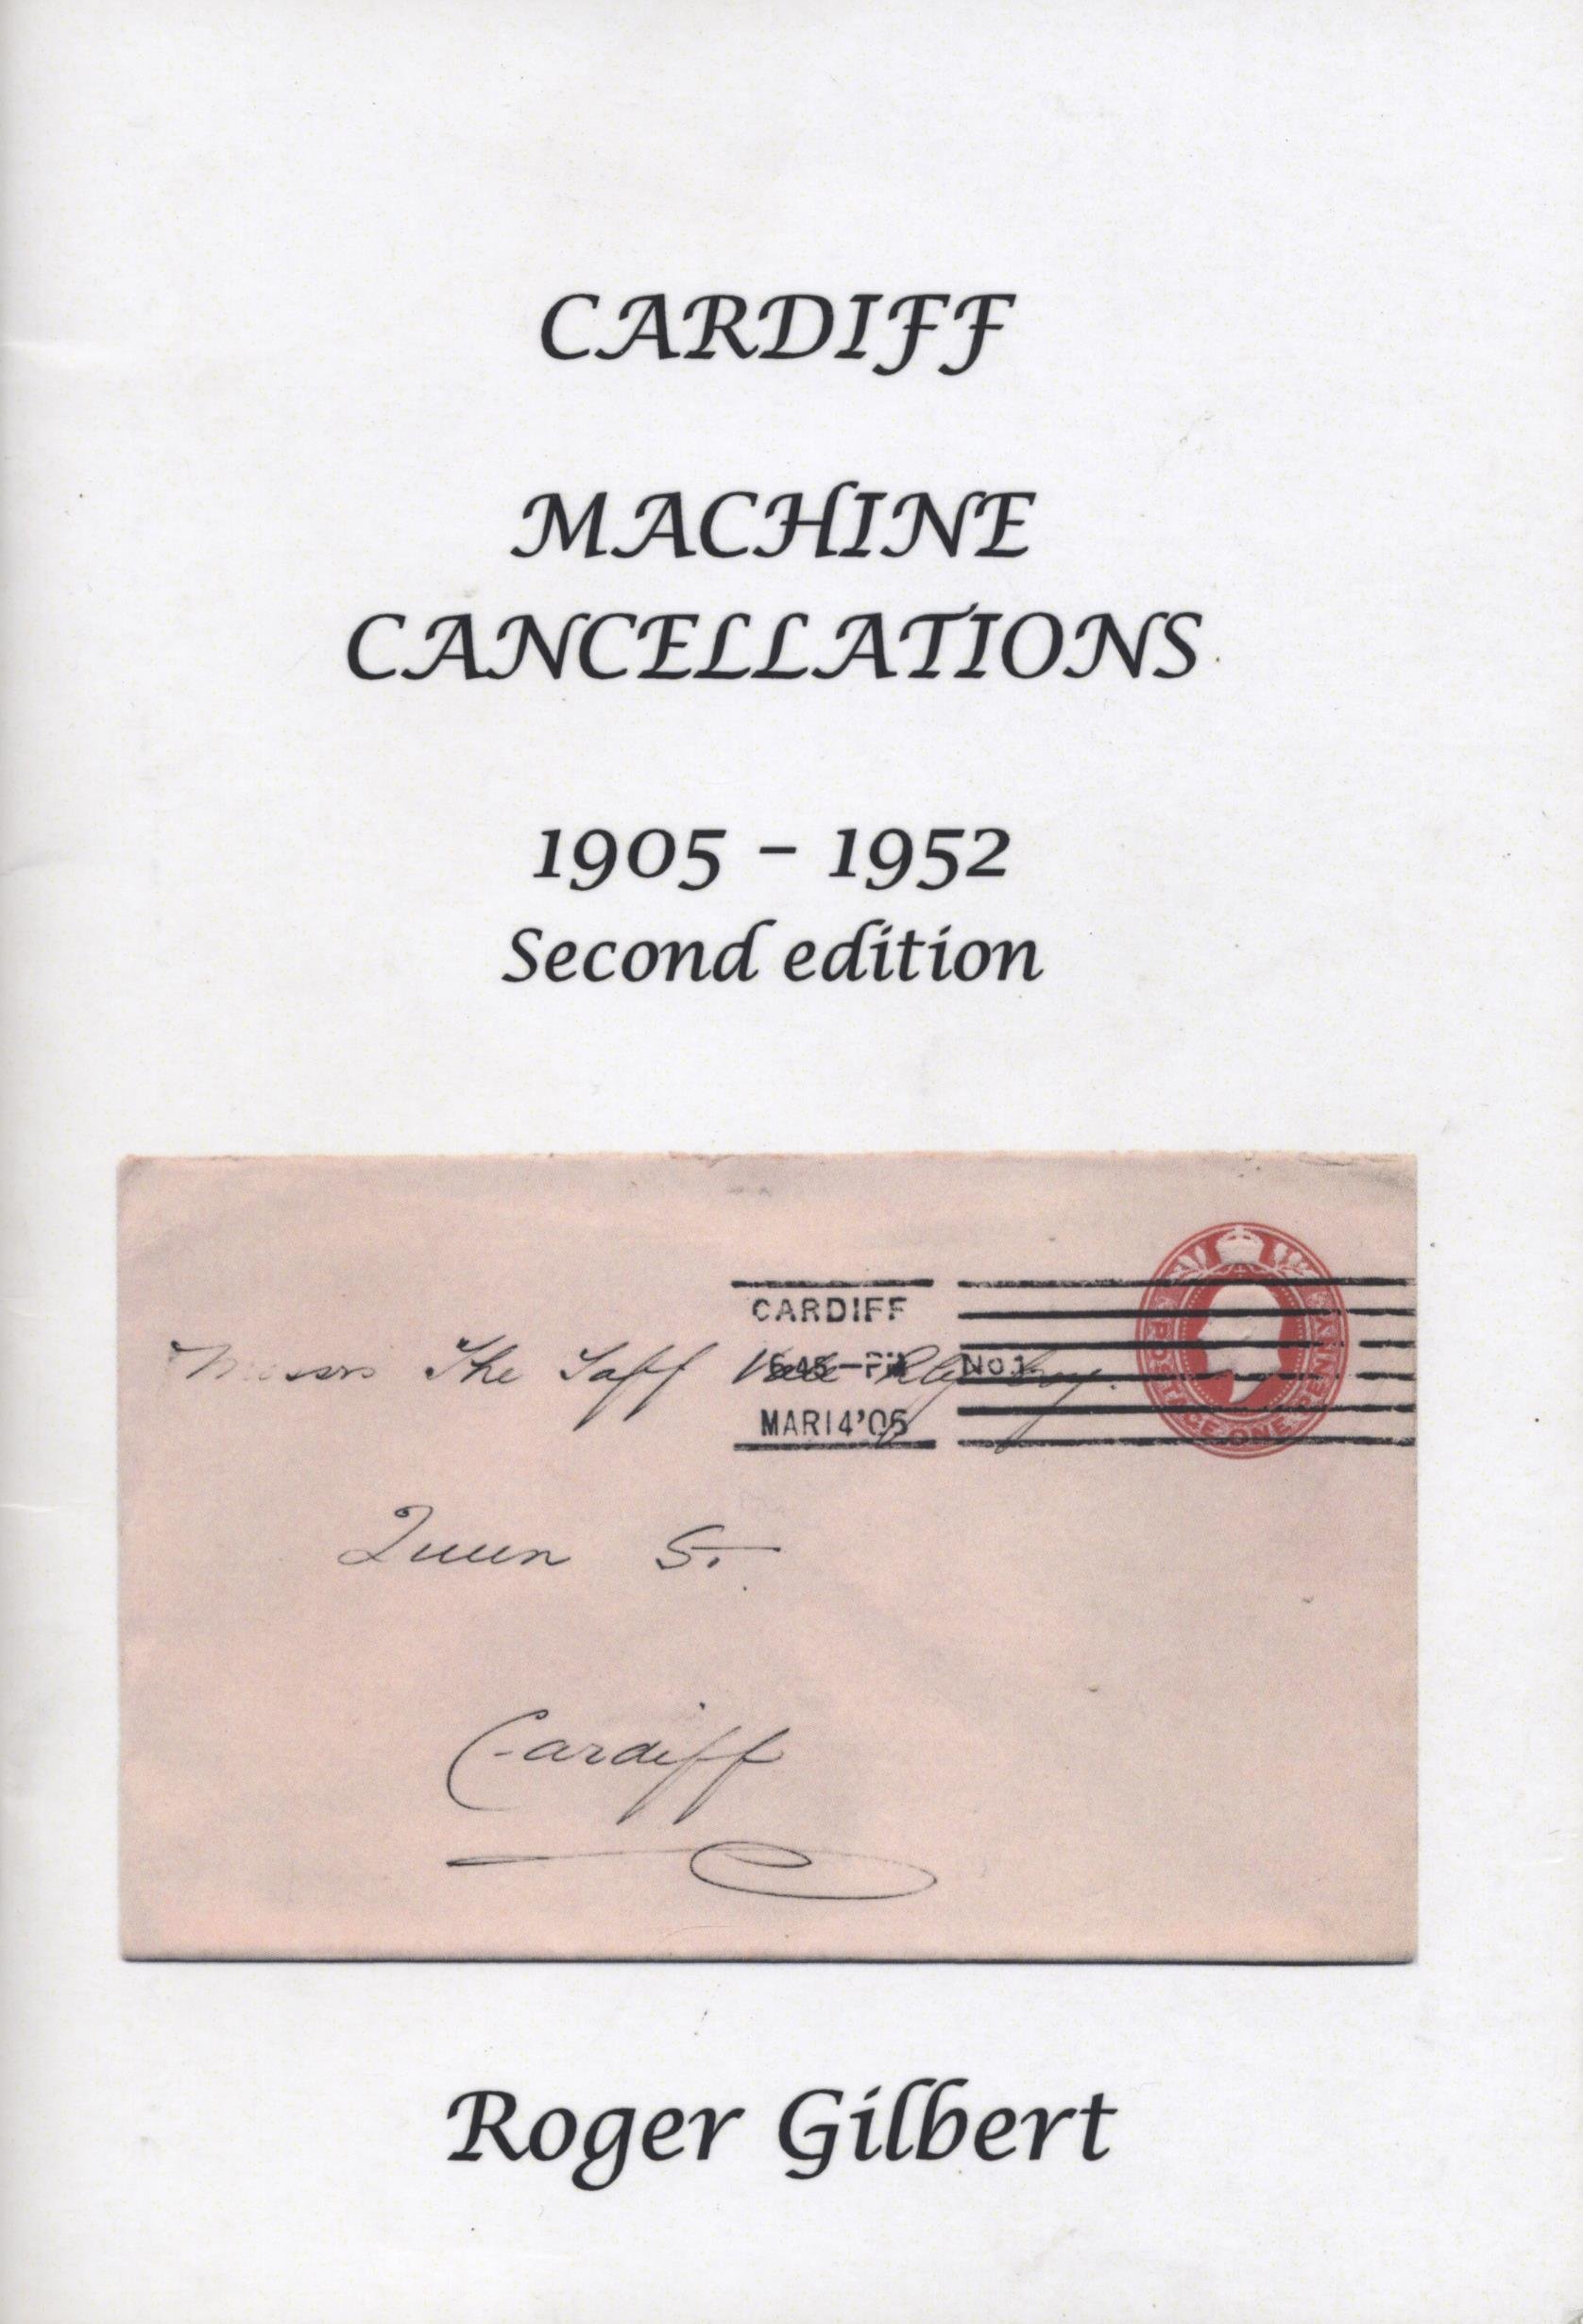 CARDIFF MACHINE CANCELLATIONS 1905 - 1952Click here to buy online